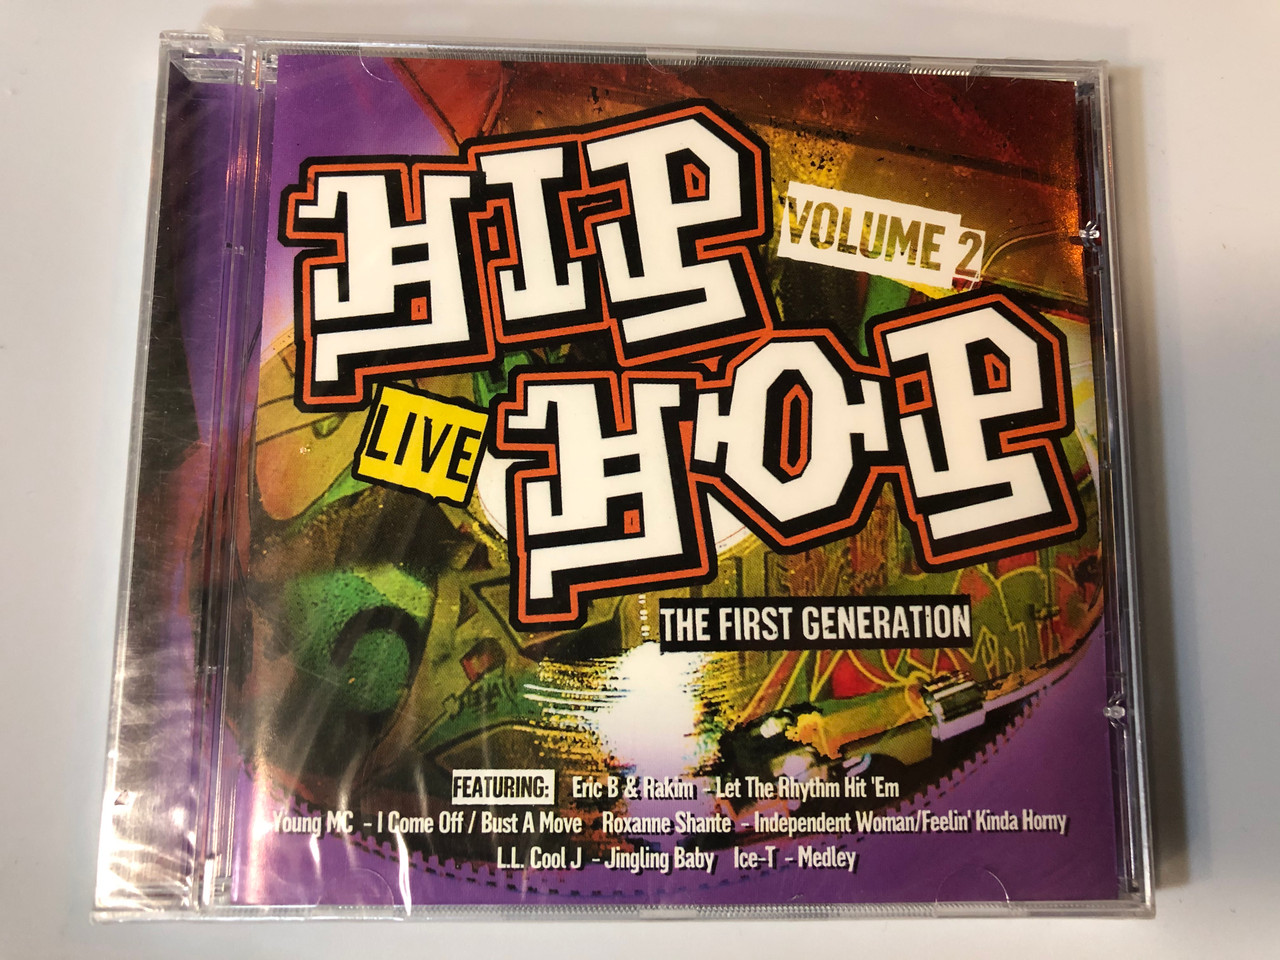 https://cdn10.bigcommerce.com/s-62bdpkt7pb/products/28113/images/168355/Hip_Hop_-_The_First_Generation_-_Volume_2_-_Live_Featuring_Eric_B._Rakim_Let_The_Rhythm_Hit_em_Young_MC_I_Come_OffBust_A_Move_Roxanne_Shante_Independent_WomanFeelin_Kinda_Horny_A_1__27948.1613475536.1280.1280.JPG?c=2&_ga=2.83312530.543434869.1618406858-6505287.1618406858